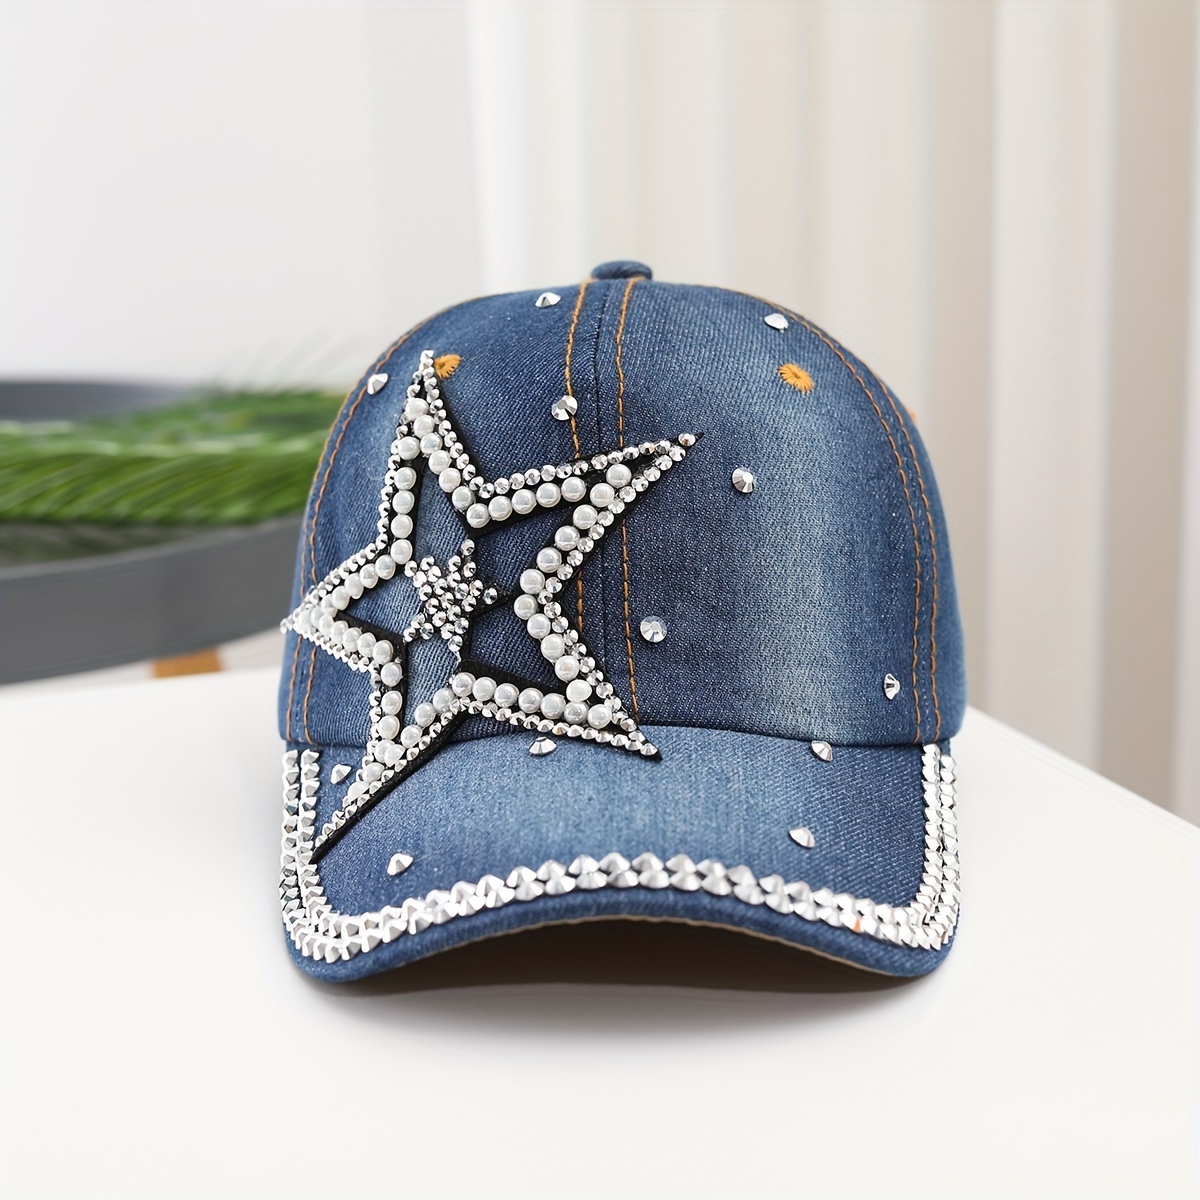 

Women's Rhinestone Studded Star Denim Baseball Cap, Adjustable Casual Outdoor Sun Protection Peaked Hat Gifts For Eid